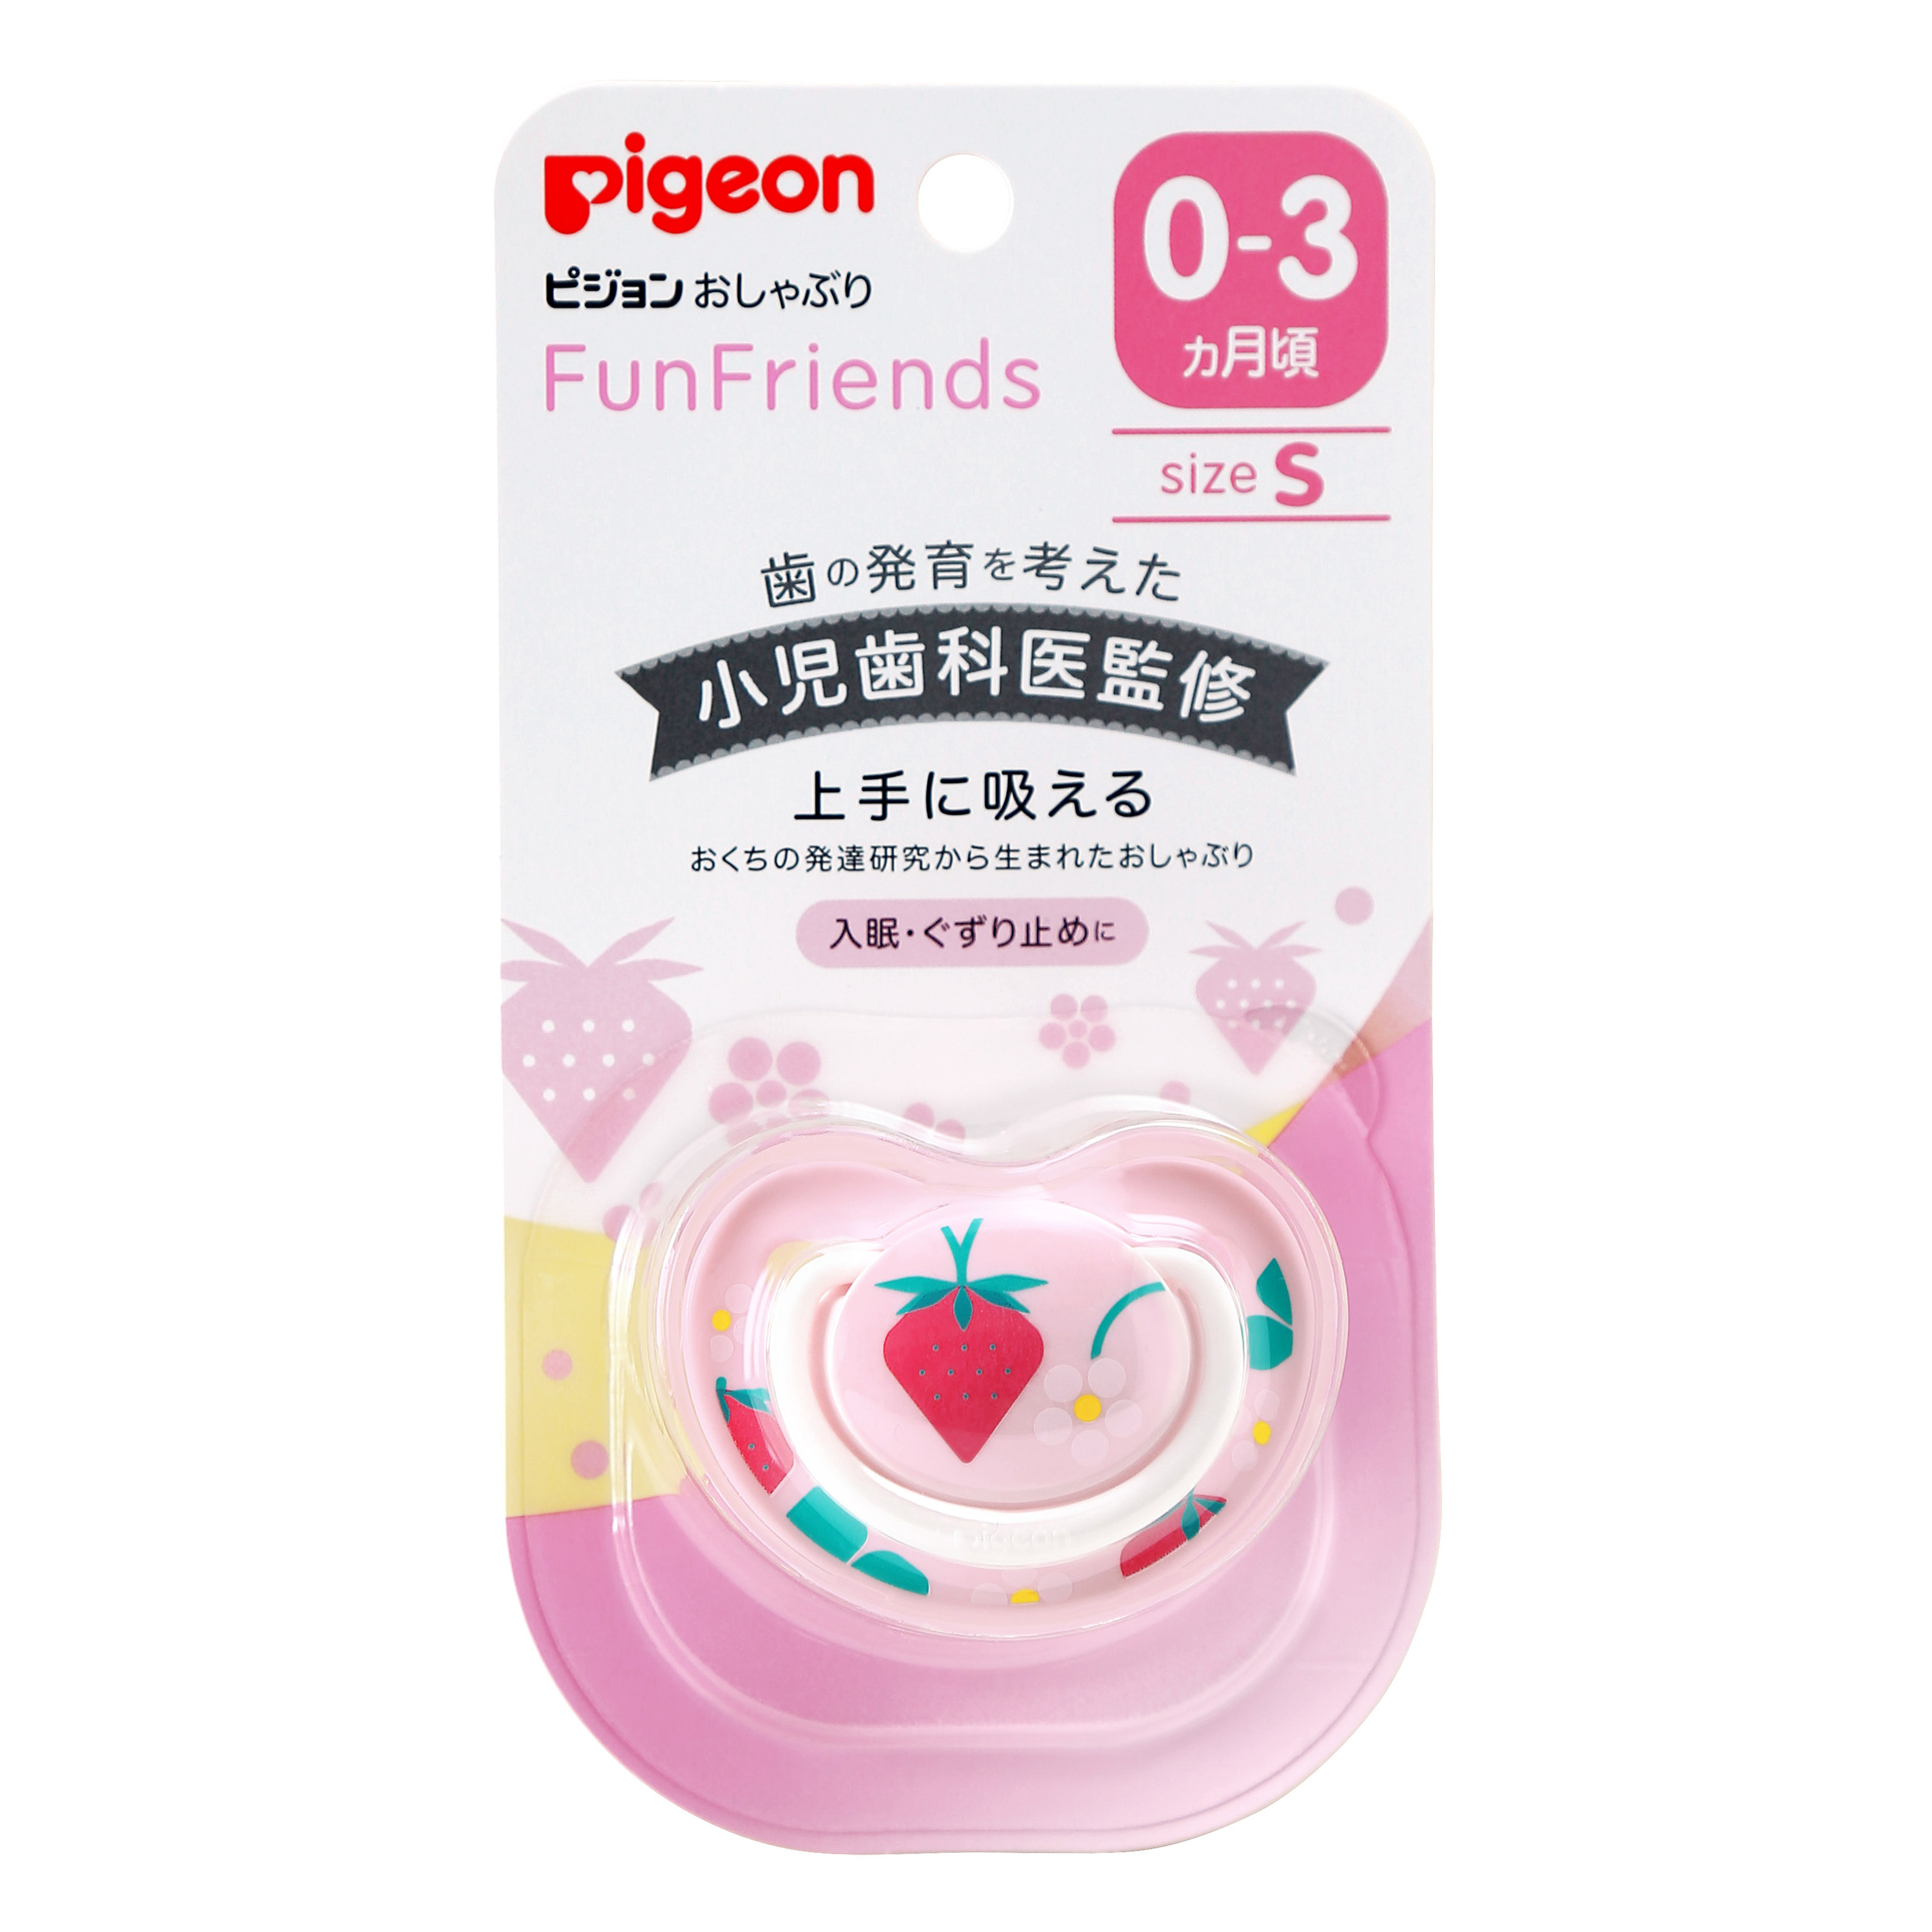 Pigeon Soother Funfriends S Size - Strawberry (JP) (PG-1018863)